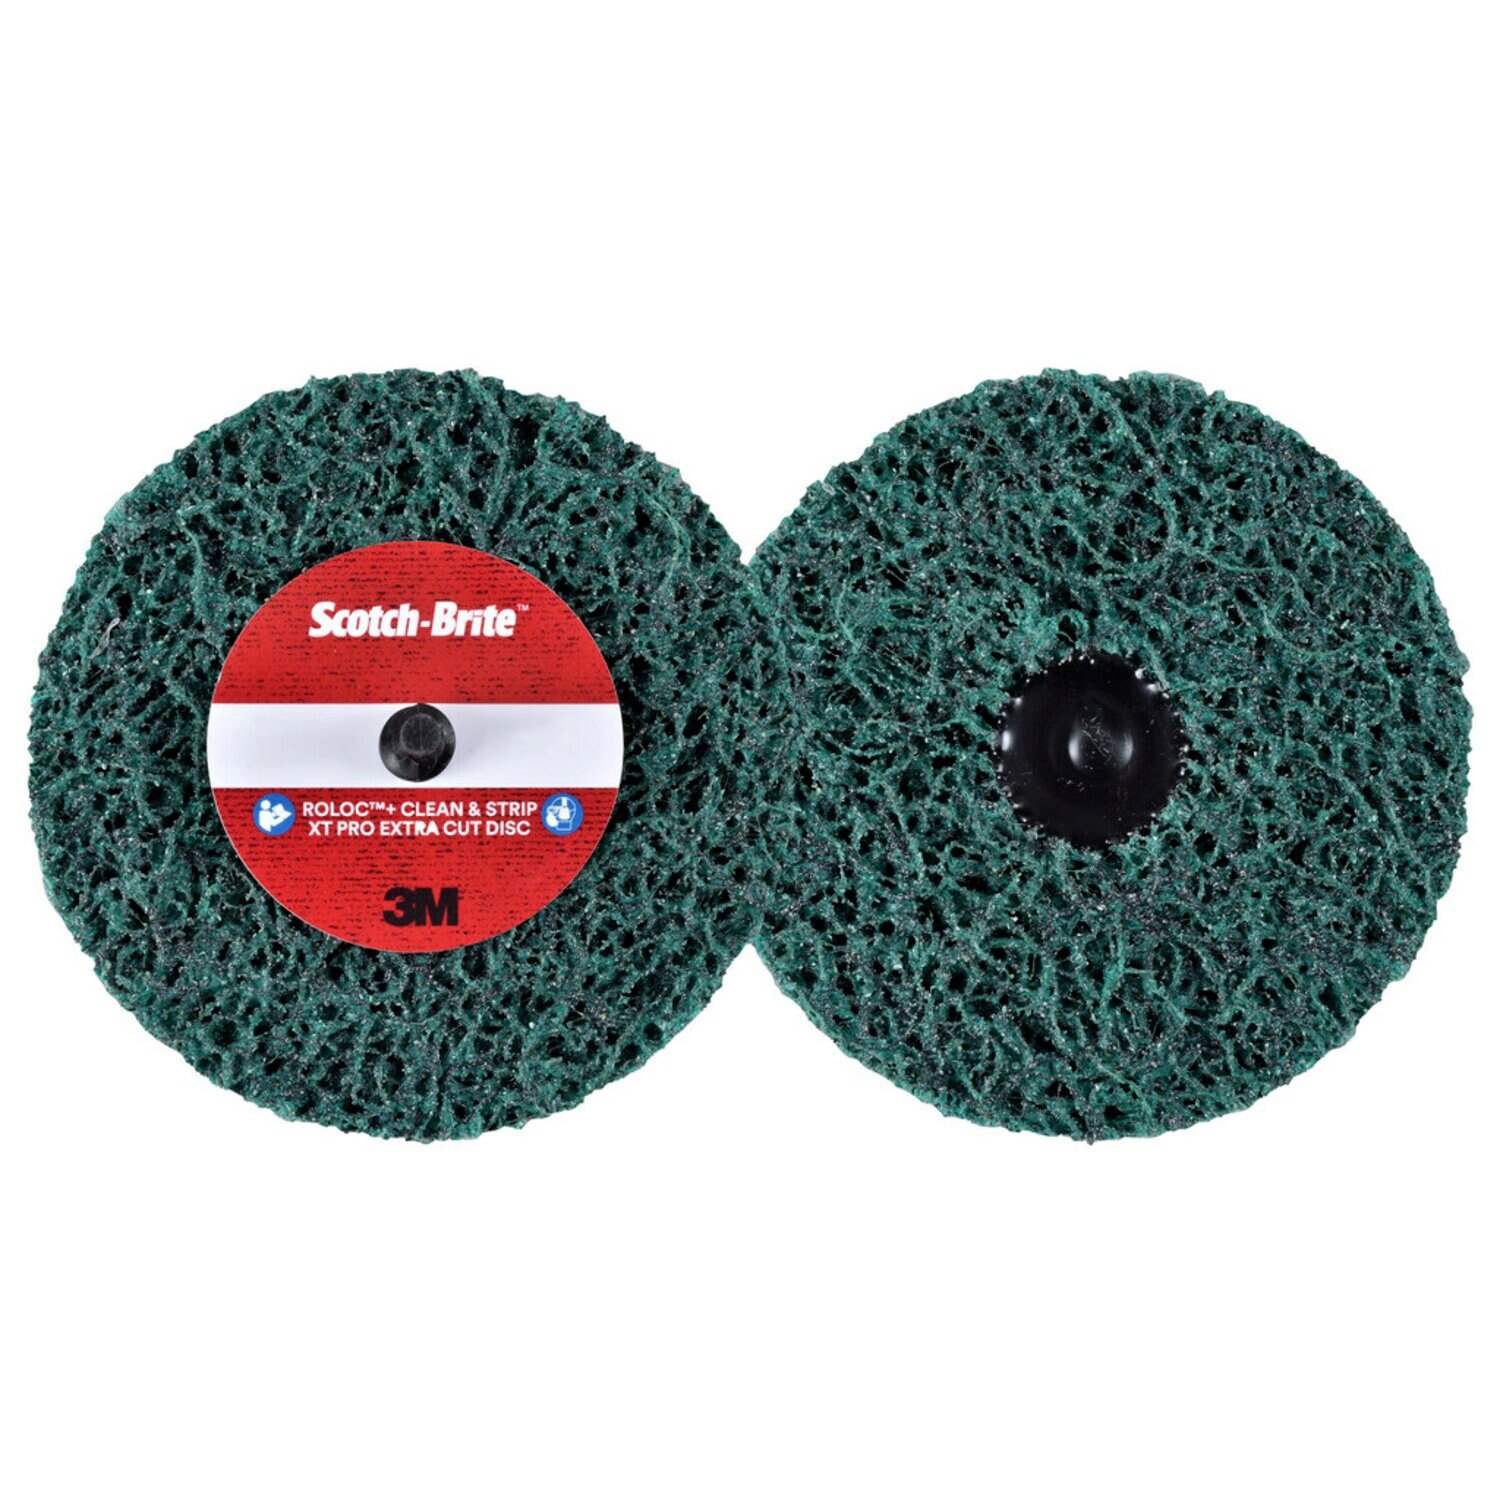 7100173793 - Scotch-Brite Roloc+ Clean and Strip XT Pro Extra Cut Disc, XC-DR+, A/O Extra Coarse, TR+, Green, 4 in x 1 in, 2 Ply, 10 ea/Case